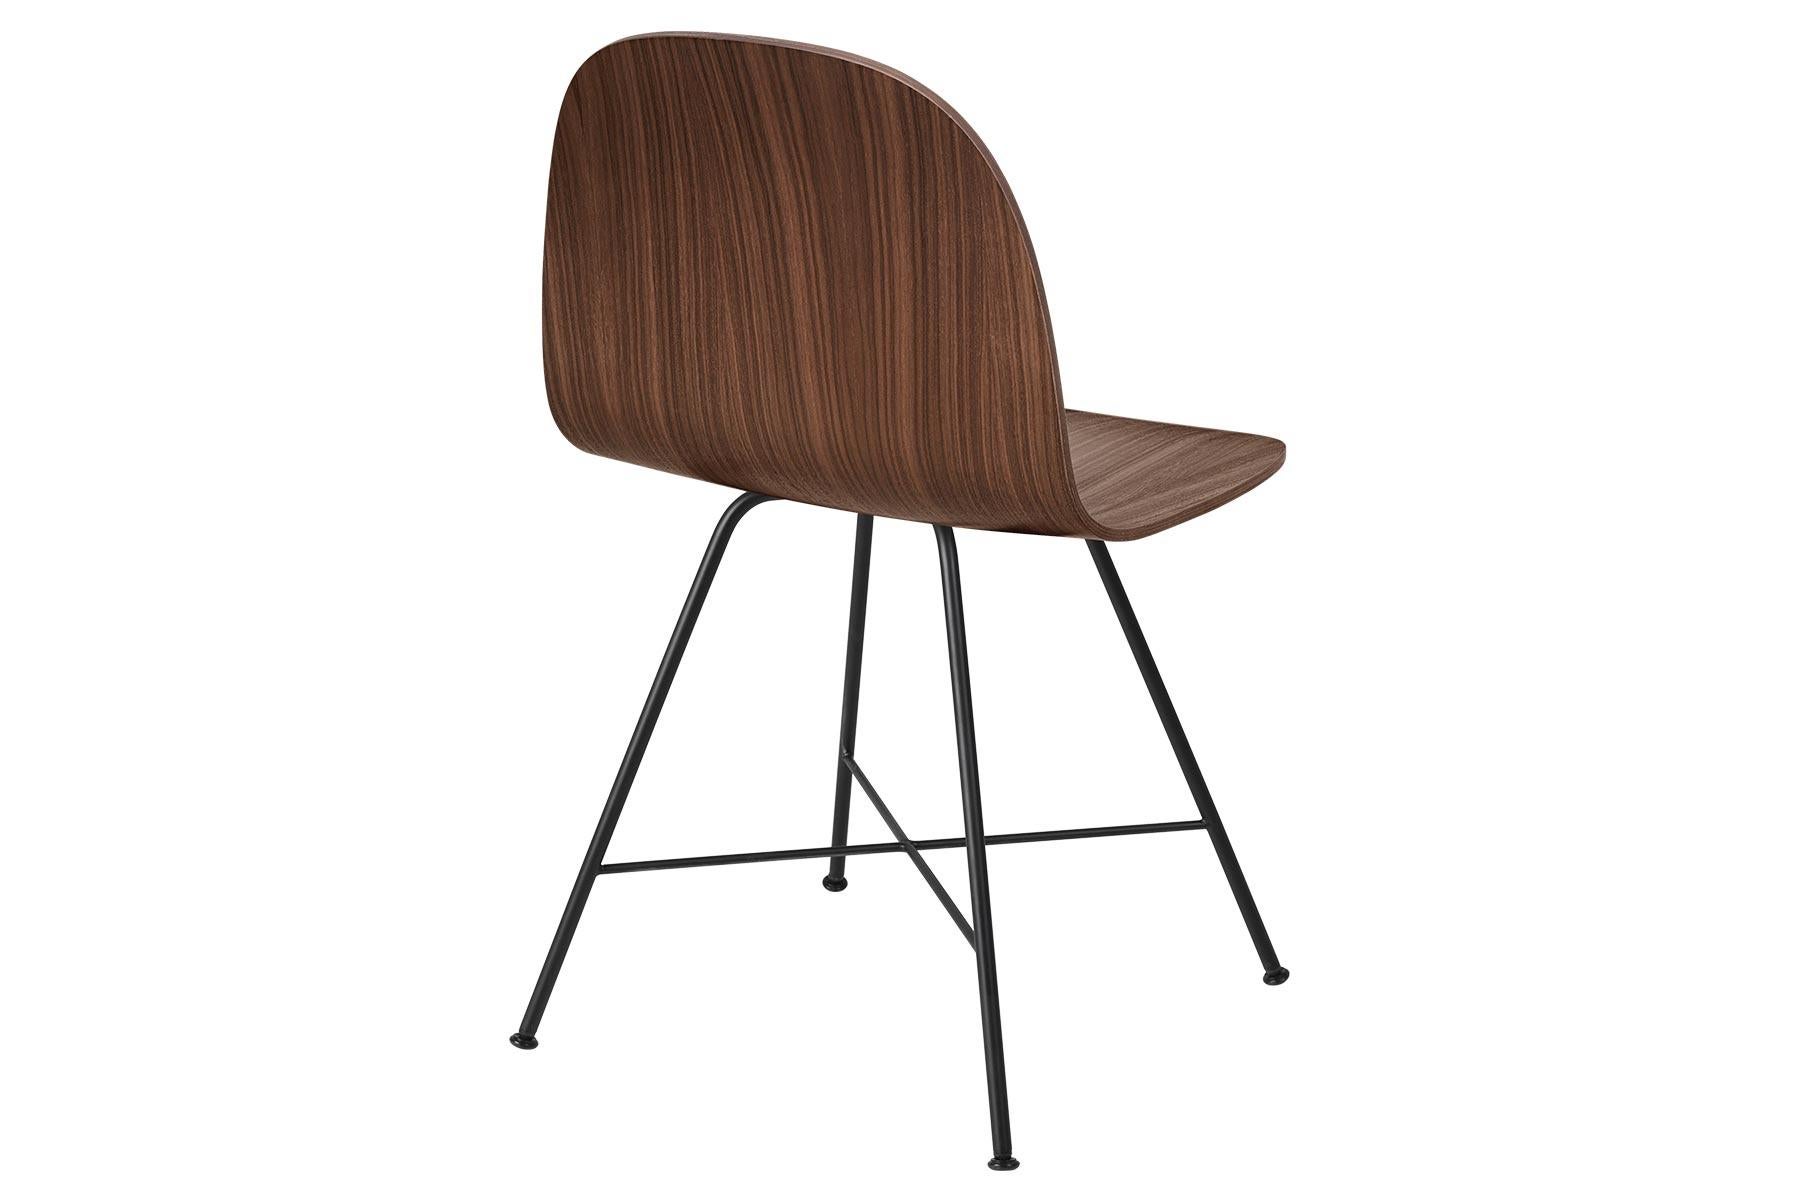 The Gubi 2D chair is a series of light dining chairs made from laminated veneer with options for front upholstery in a wide range of fabrics and leathers, suitable for both private and public spaces. Being an extension to the Classic Gubi 3D chair,